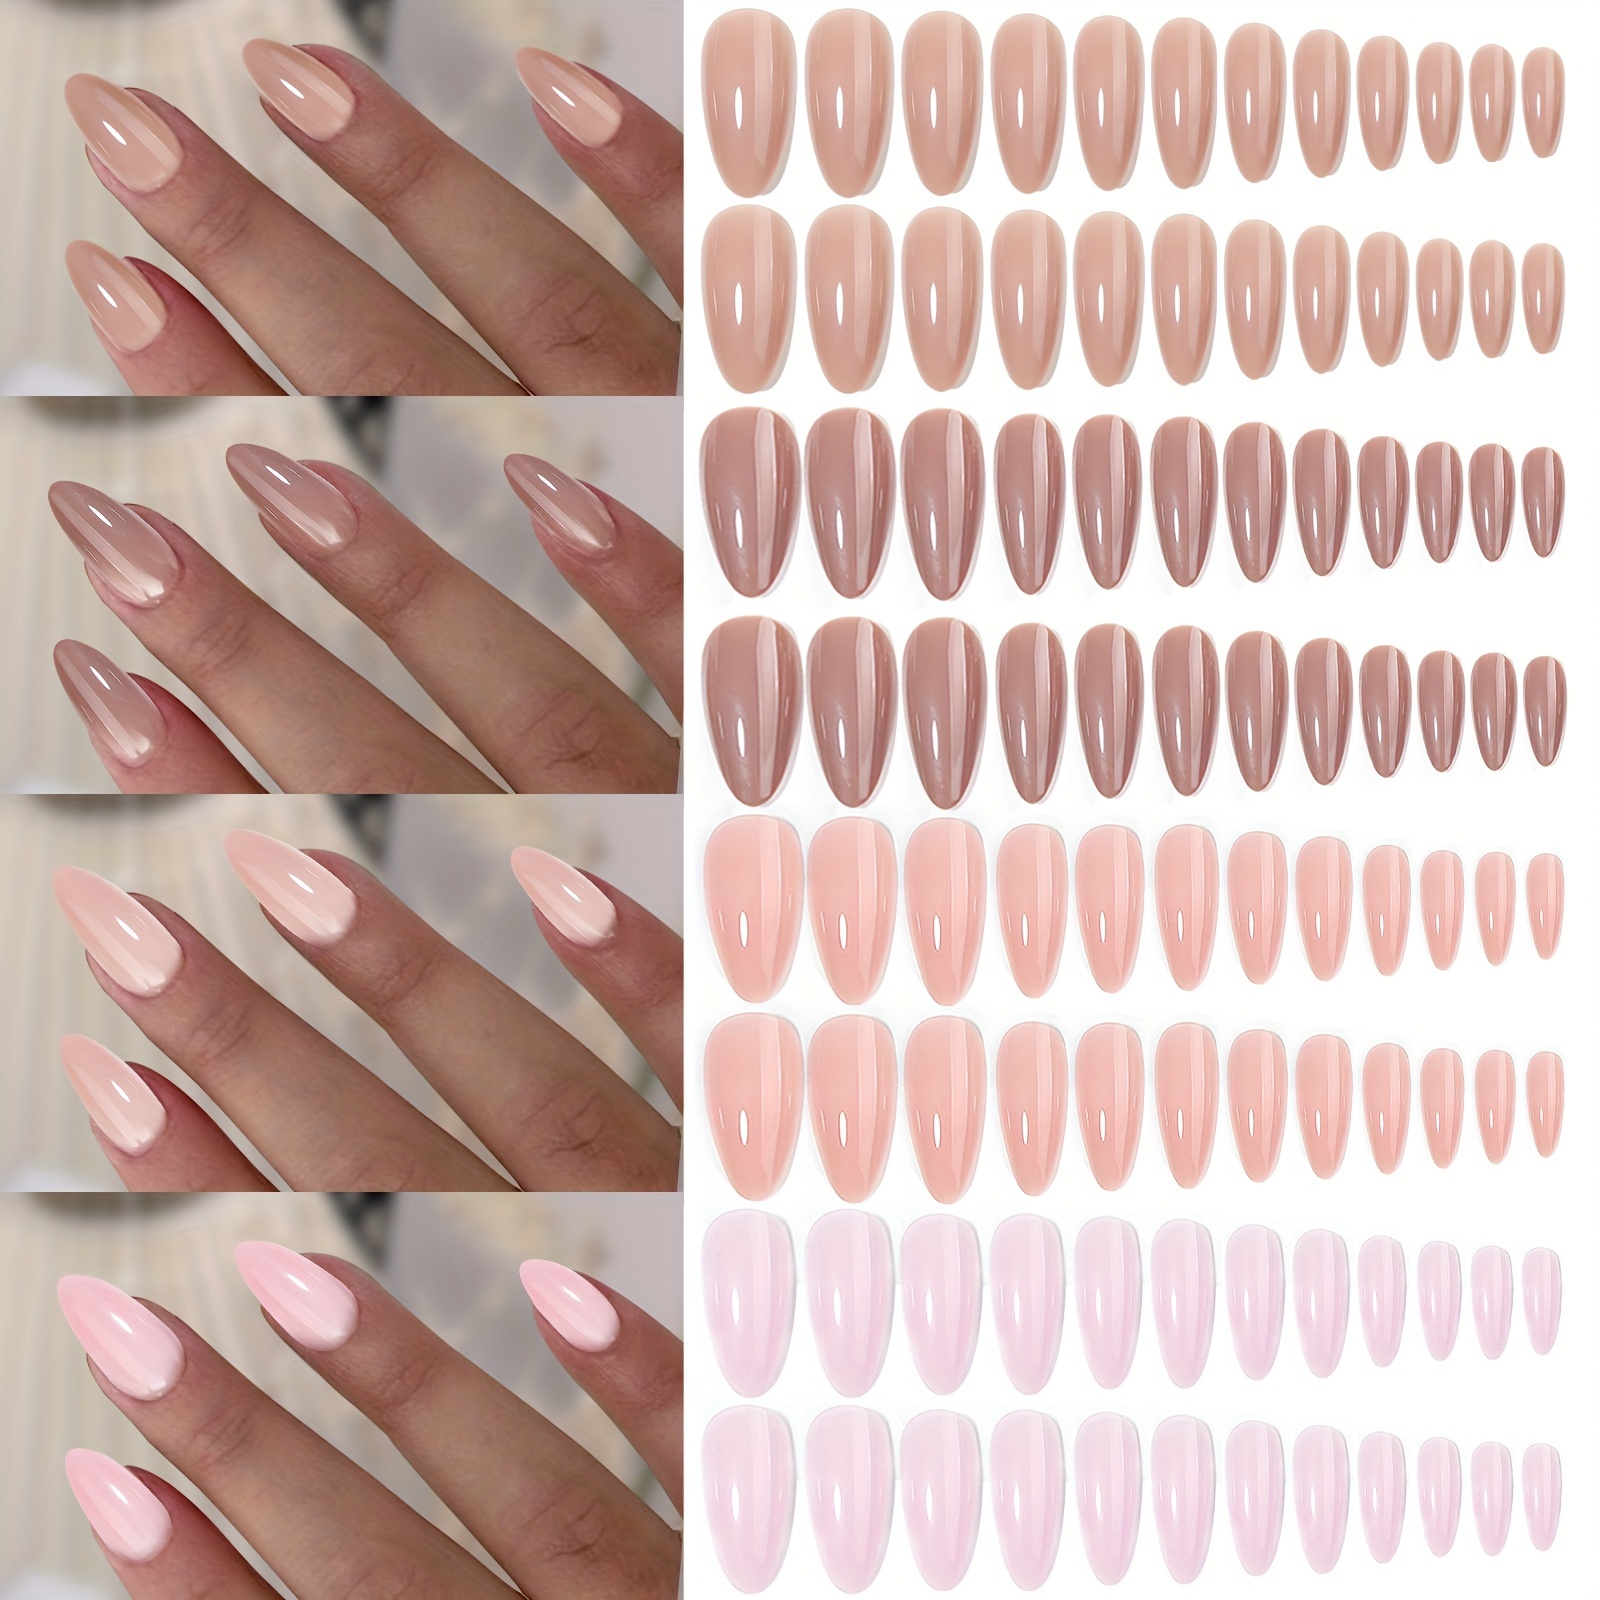 

96pcs Nude Almond False Nails Set, Wearable Pre-designed Fake Nail Art Tips For Salon & Diy Manicure, Durable Acrylic Press On Nails With Adhesive Tabs And Case